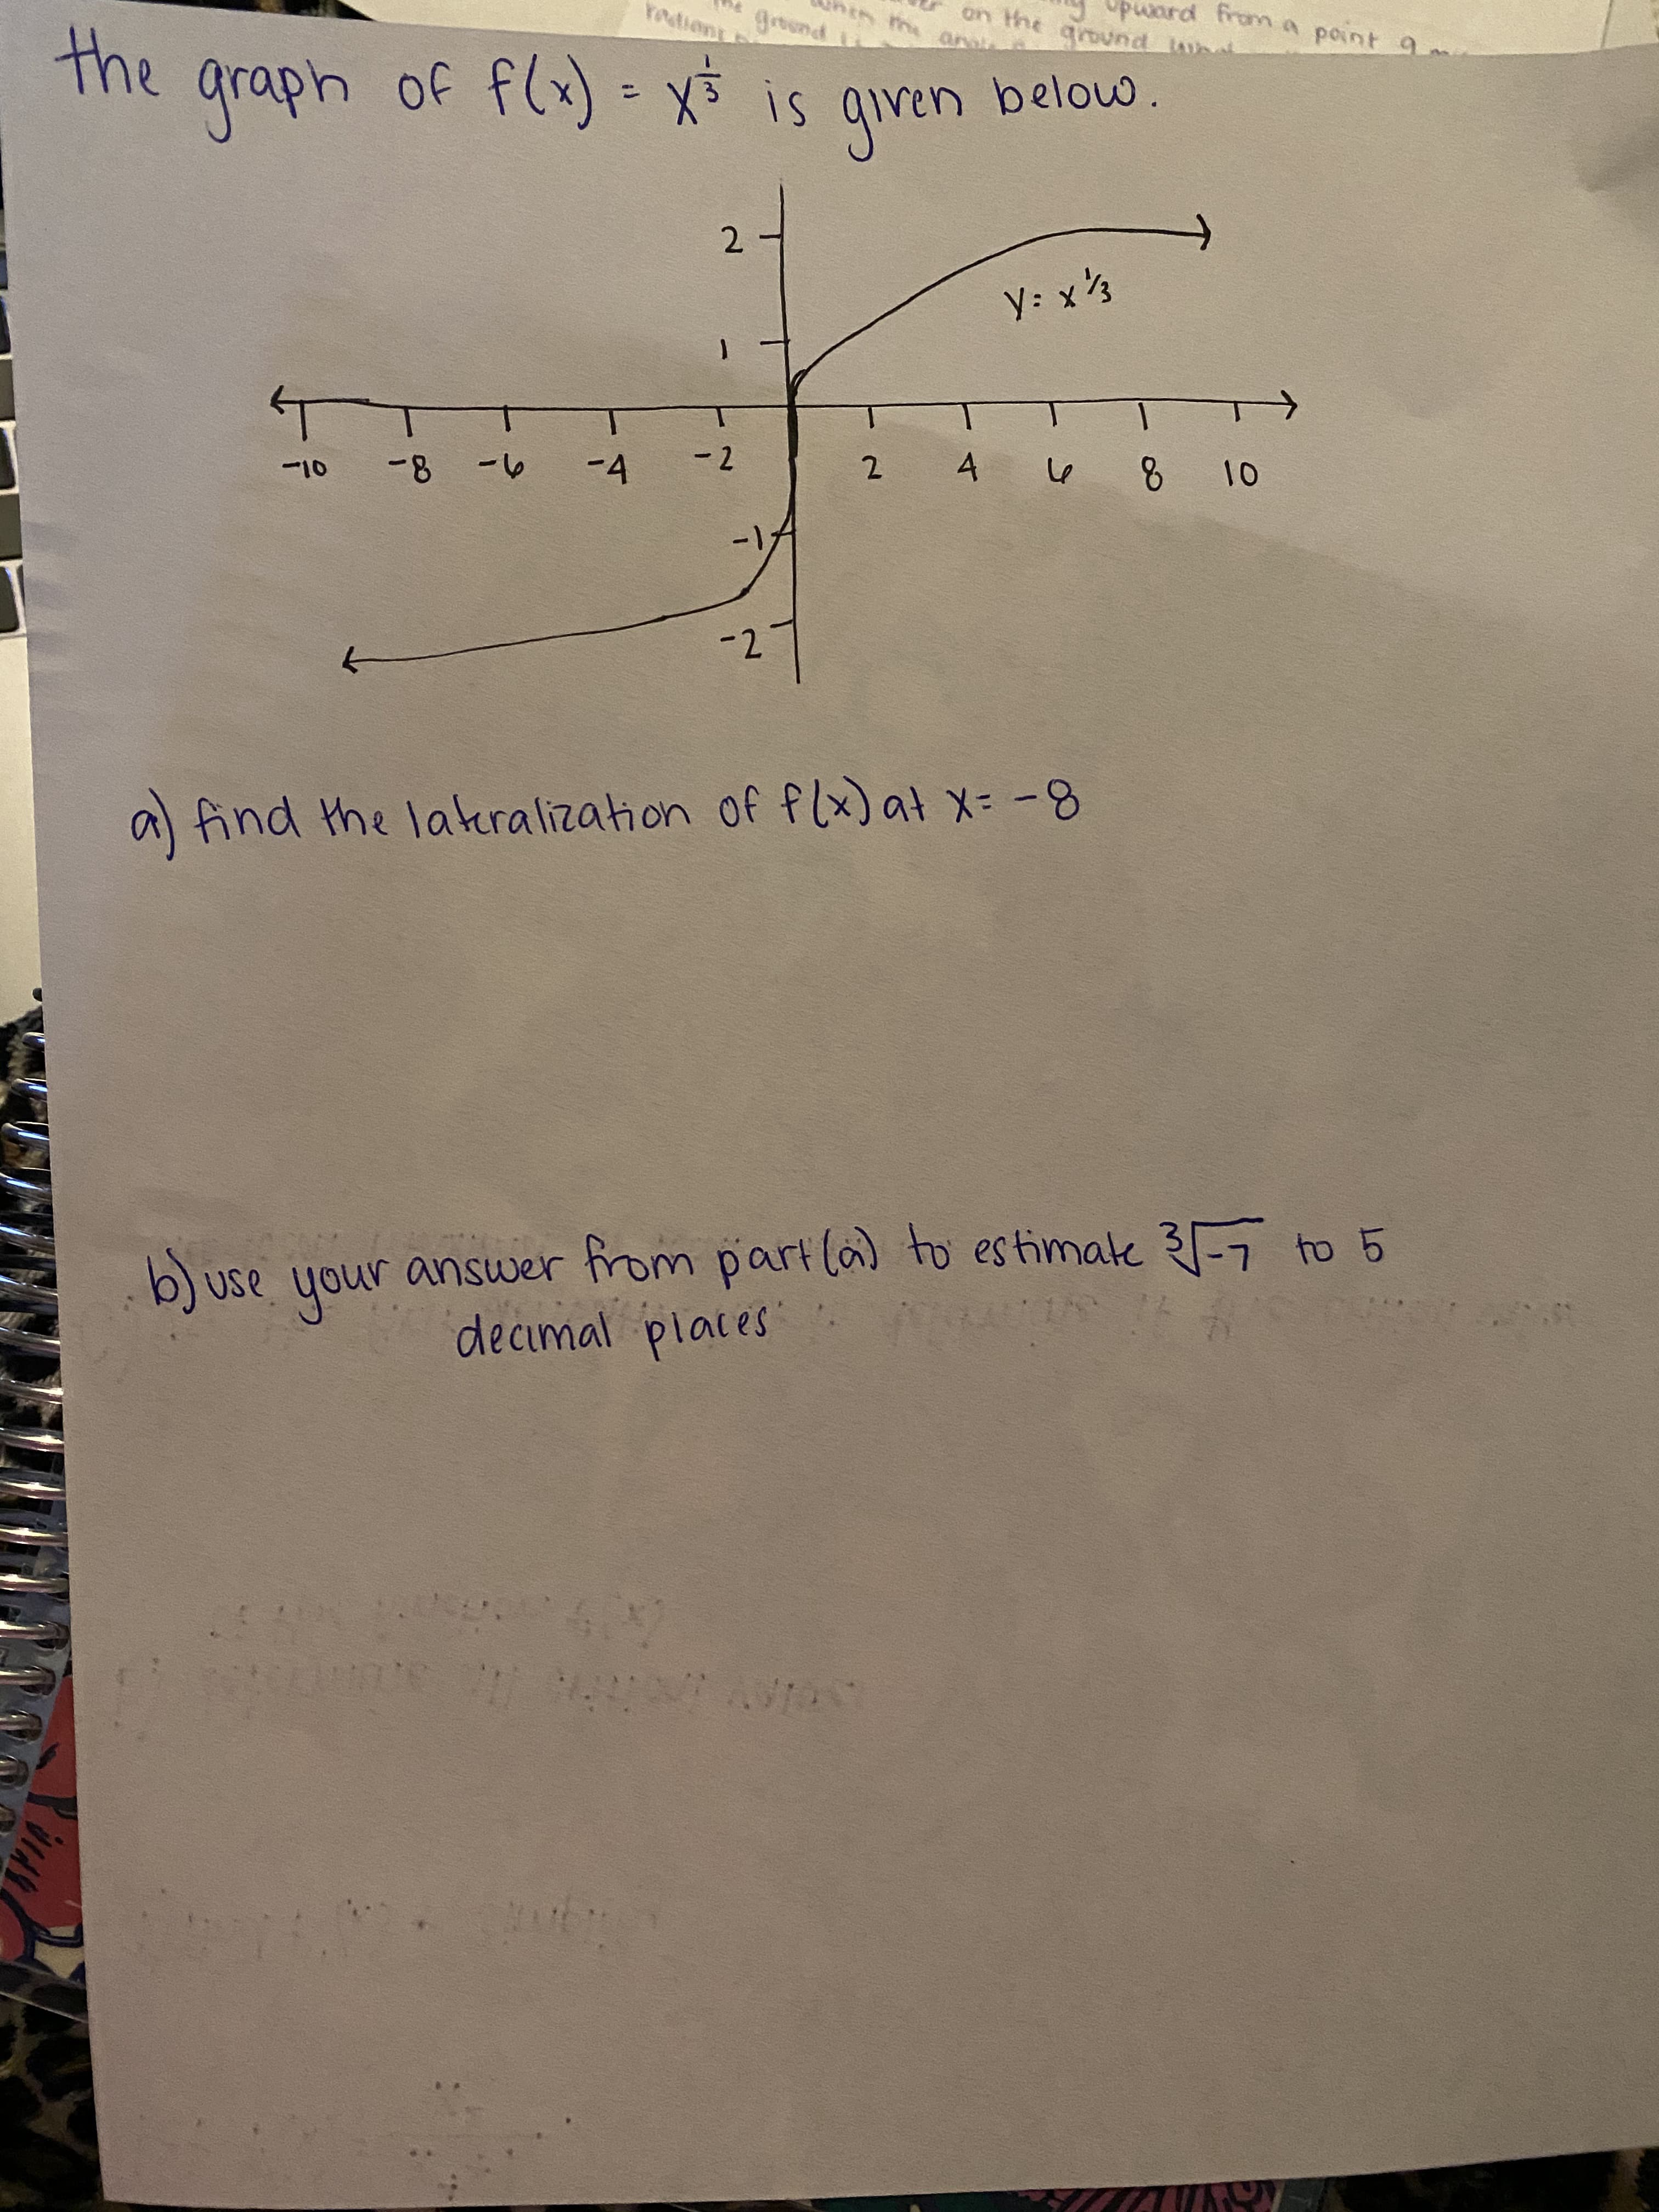 ground a
the graph of fl+) - x
is
below.
